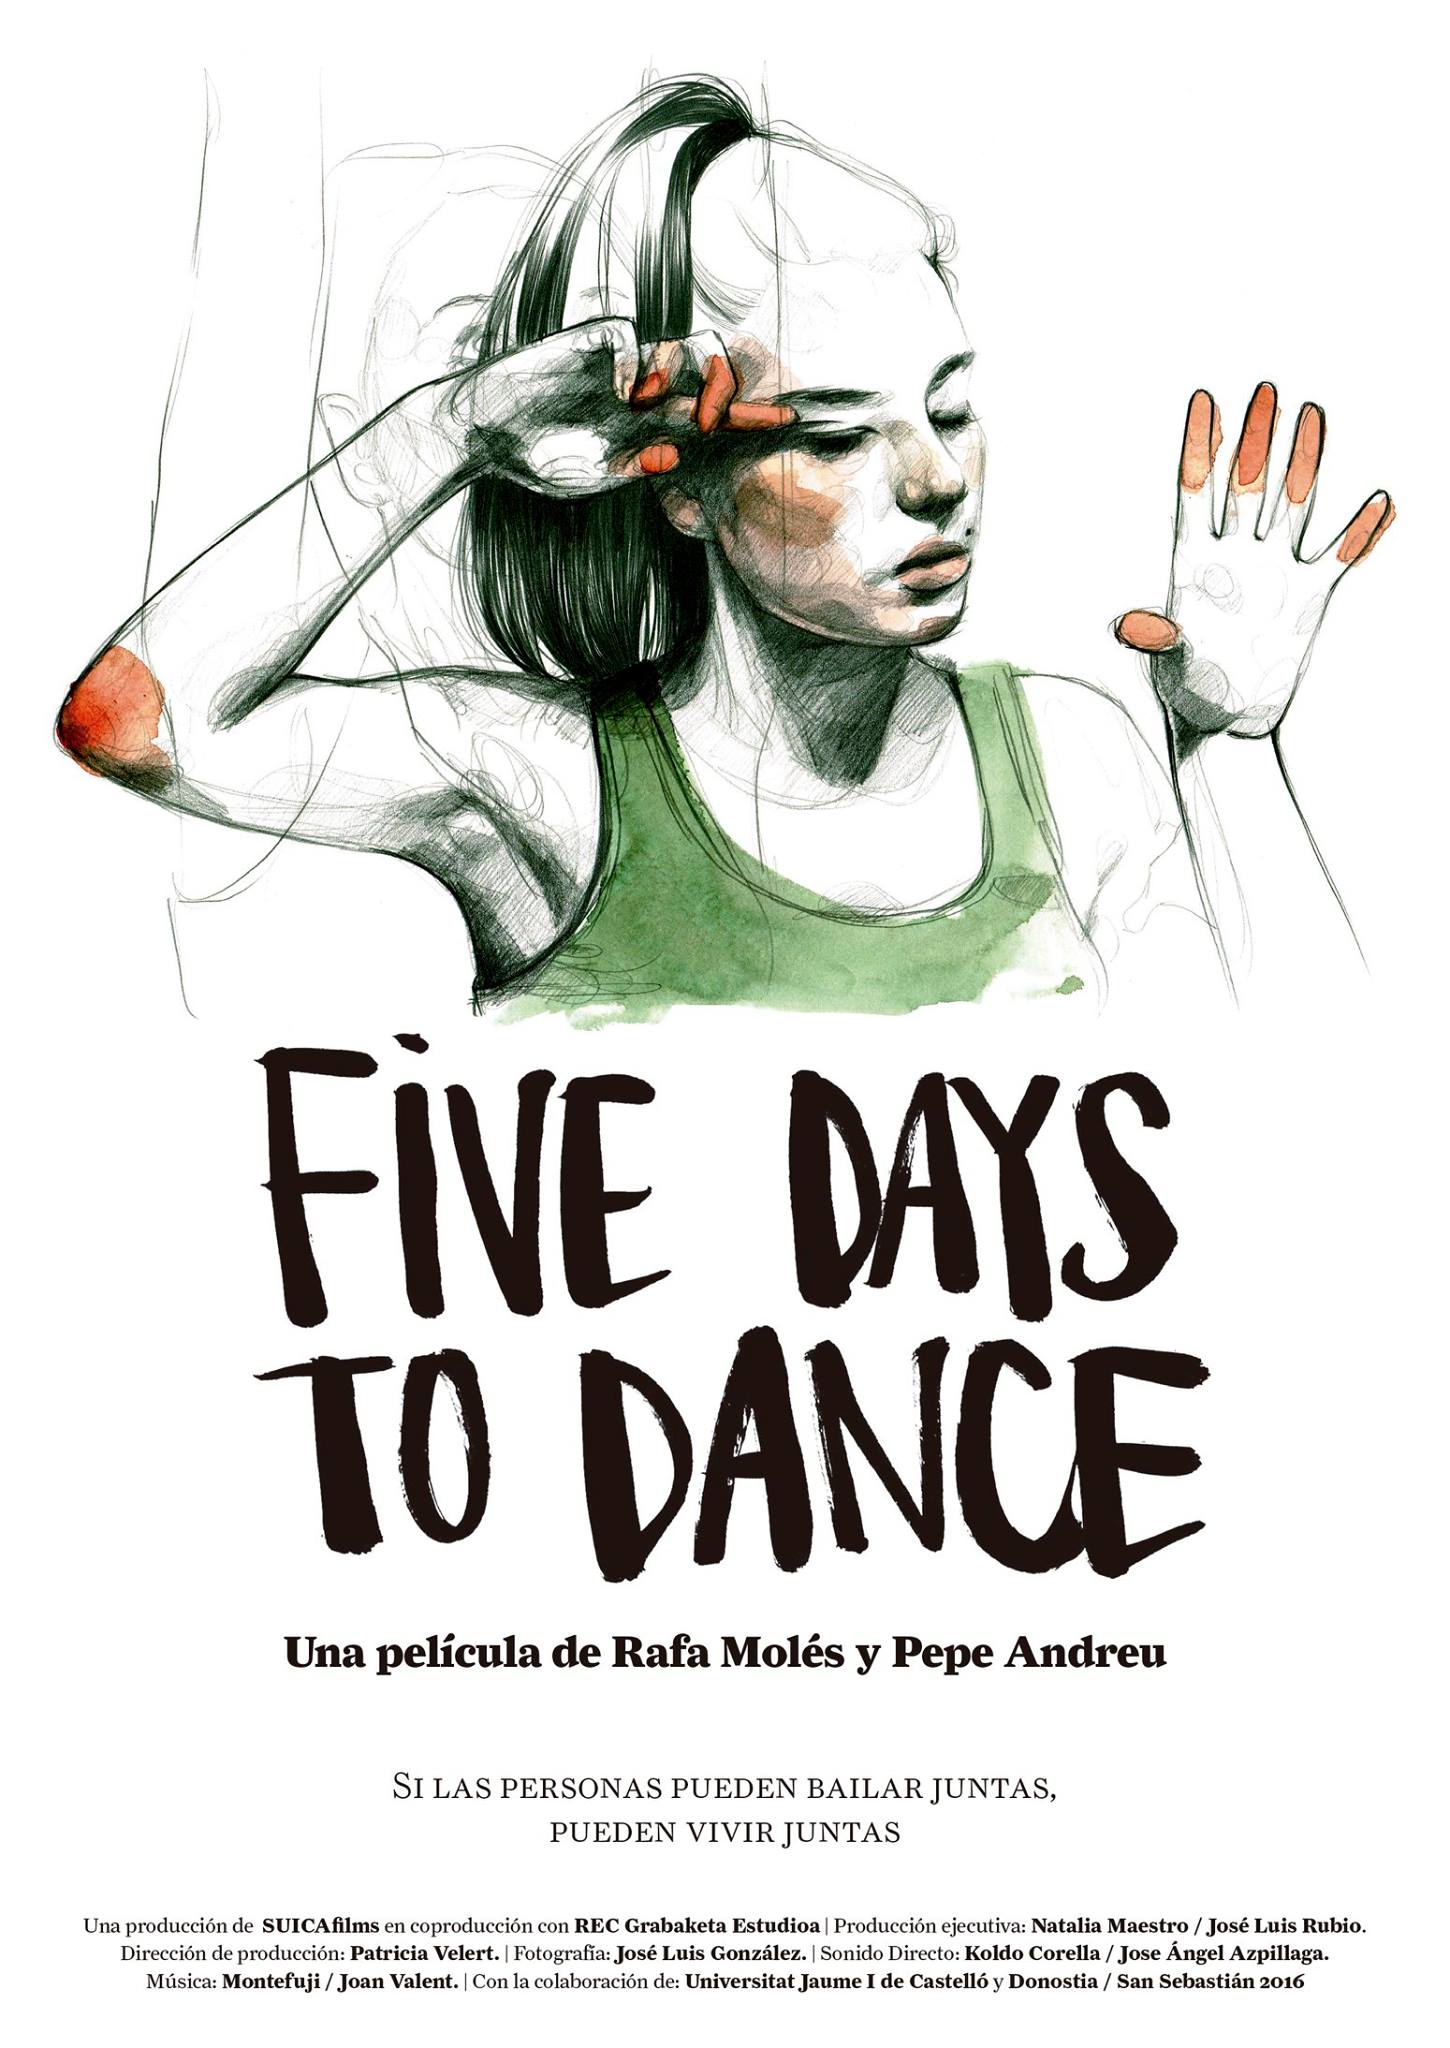 FIVE DAYS TO DANCE